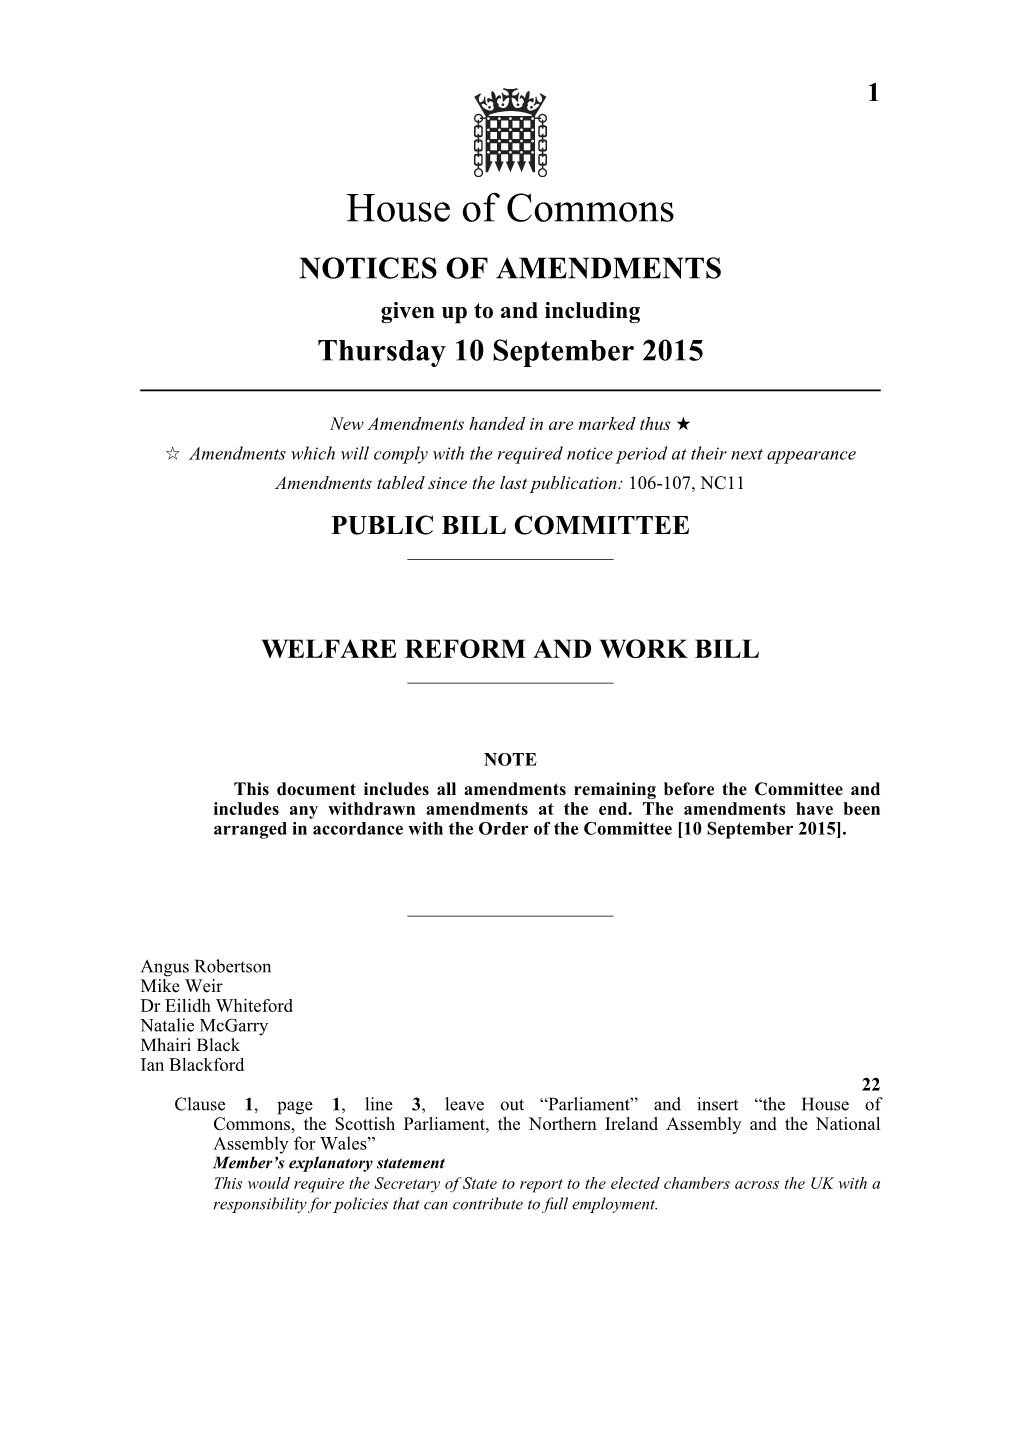 House of Commons NOTICES of AMENDMENTS Given up to and Including Thursday 10 September 2015